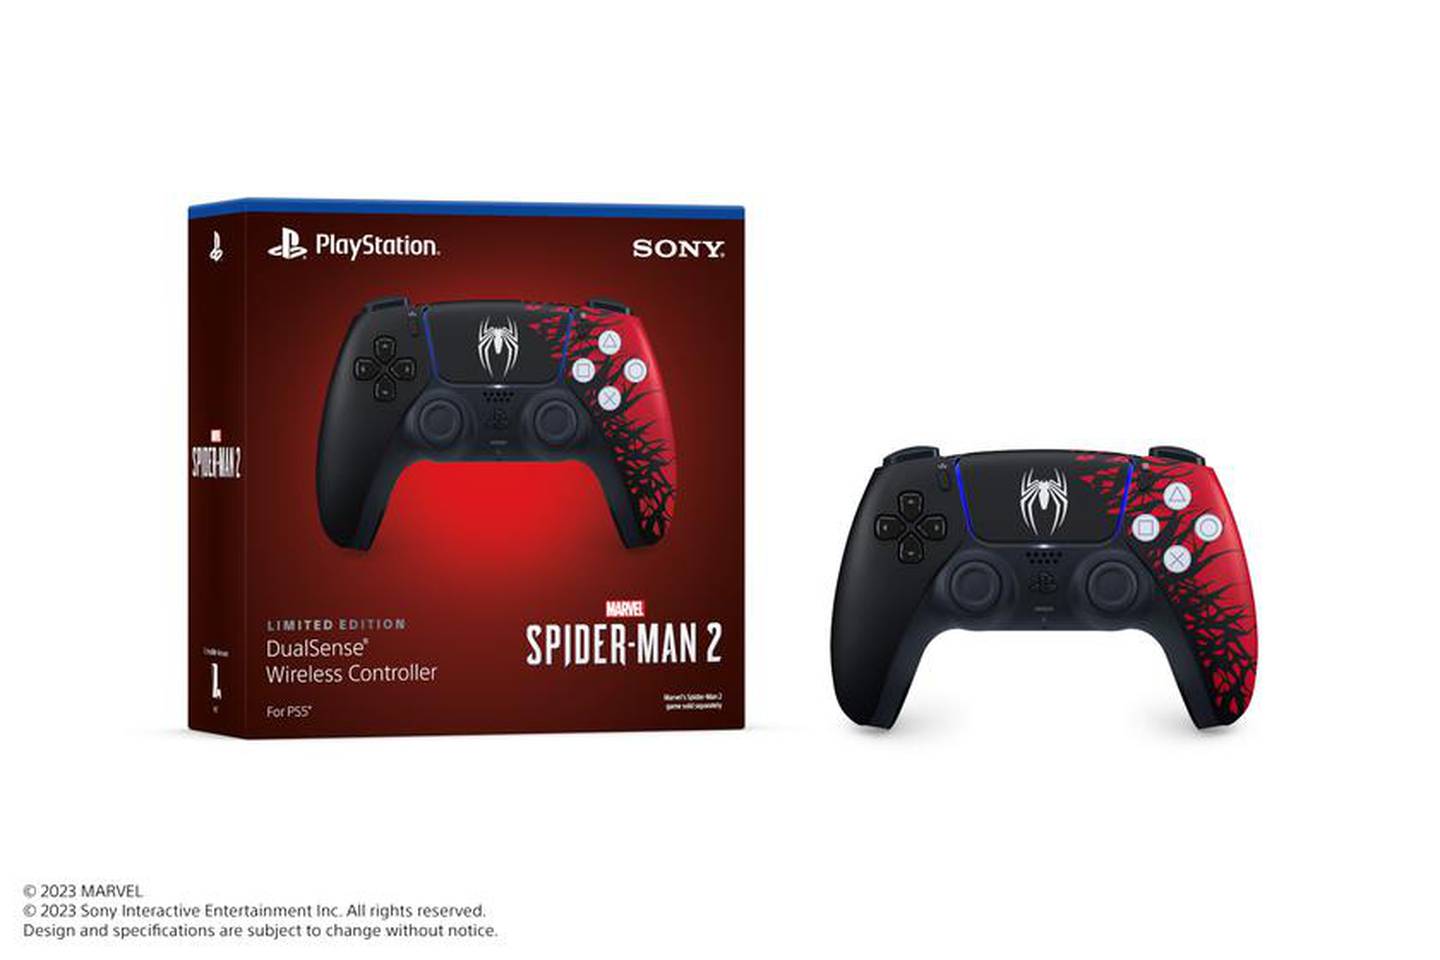 For those who may have a problem with the original design of the PlayStation 5, Sony has announced an unmissable bundle of Marvel's Spider-Man 2.